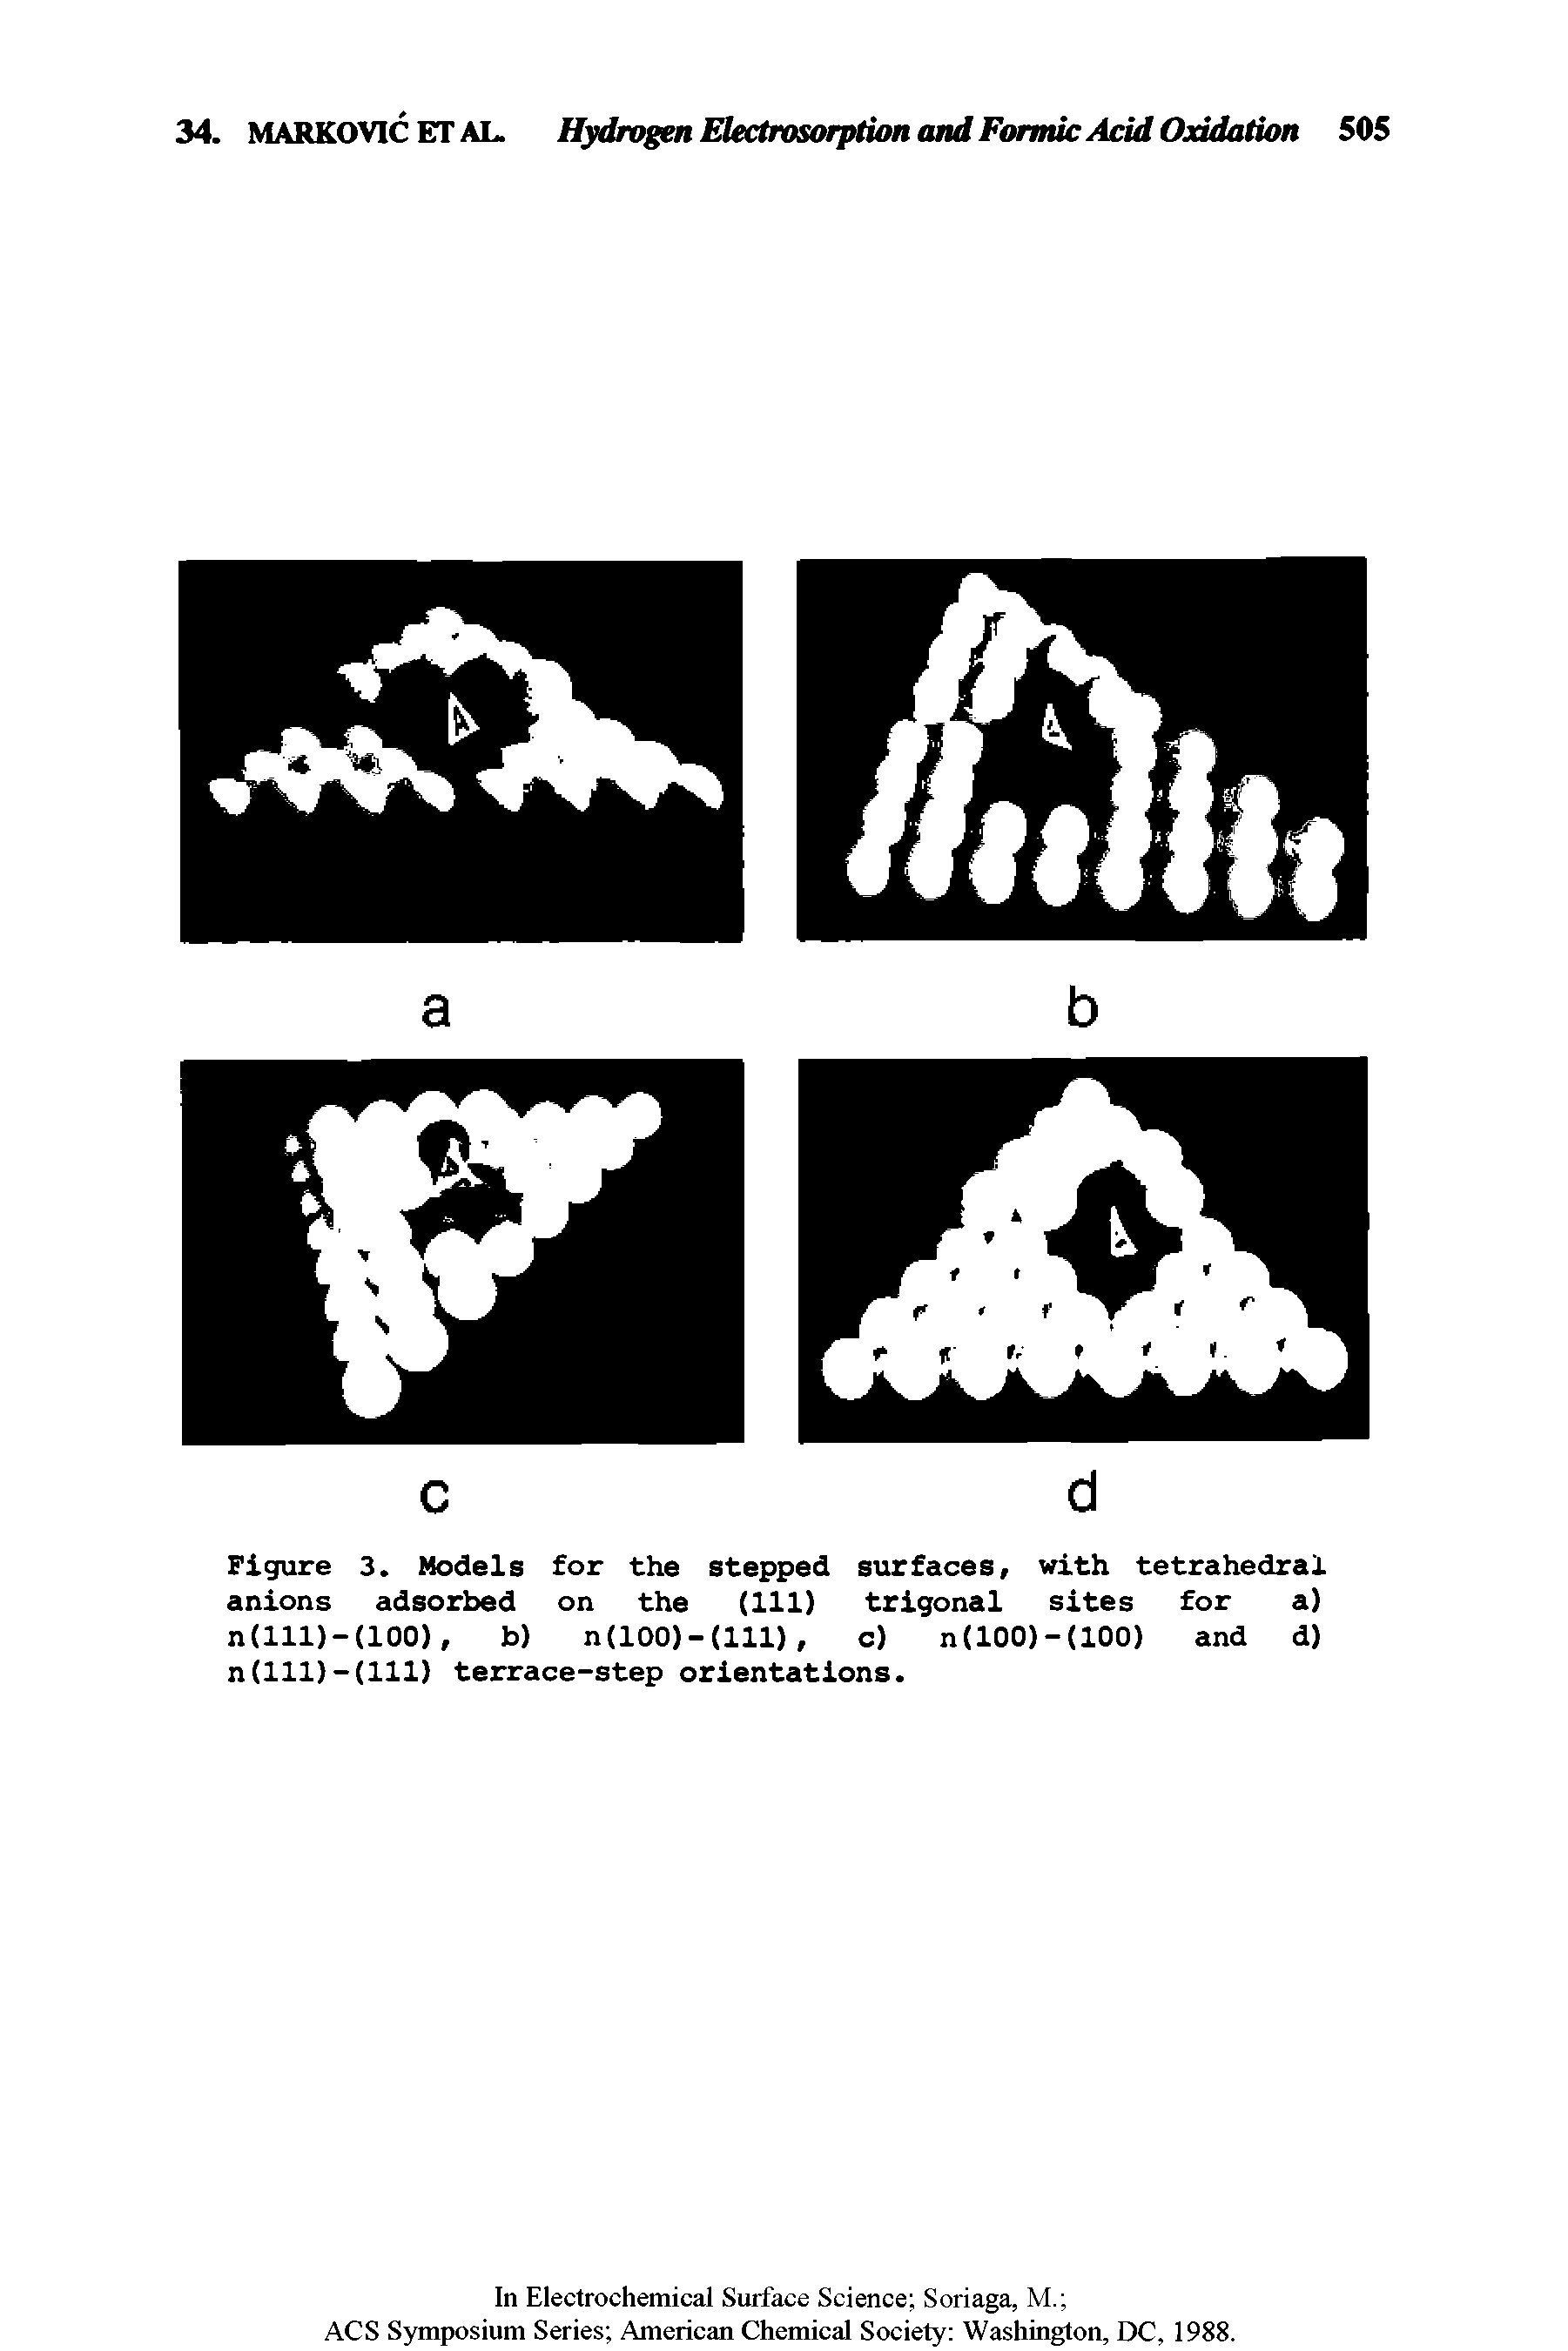 Figure 3. Models for the stepped surfaces, with tetrahedral anions adsorbed on the (111) trigonal sites for a) n(lll)-(100), b) n(100)- (111), o) n(100)-(100) and d) n(lll)-(lll) terrace-step orientations.